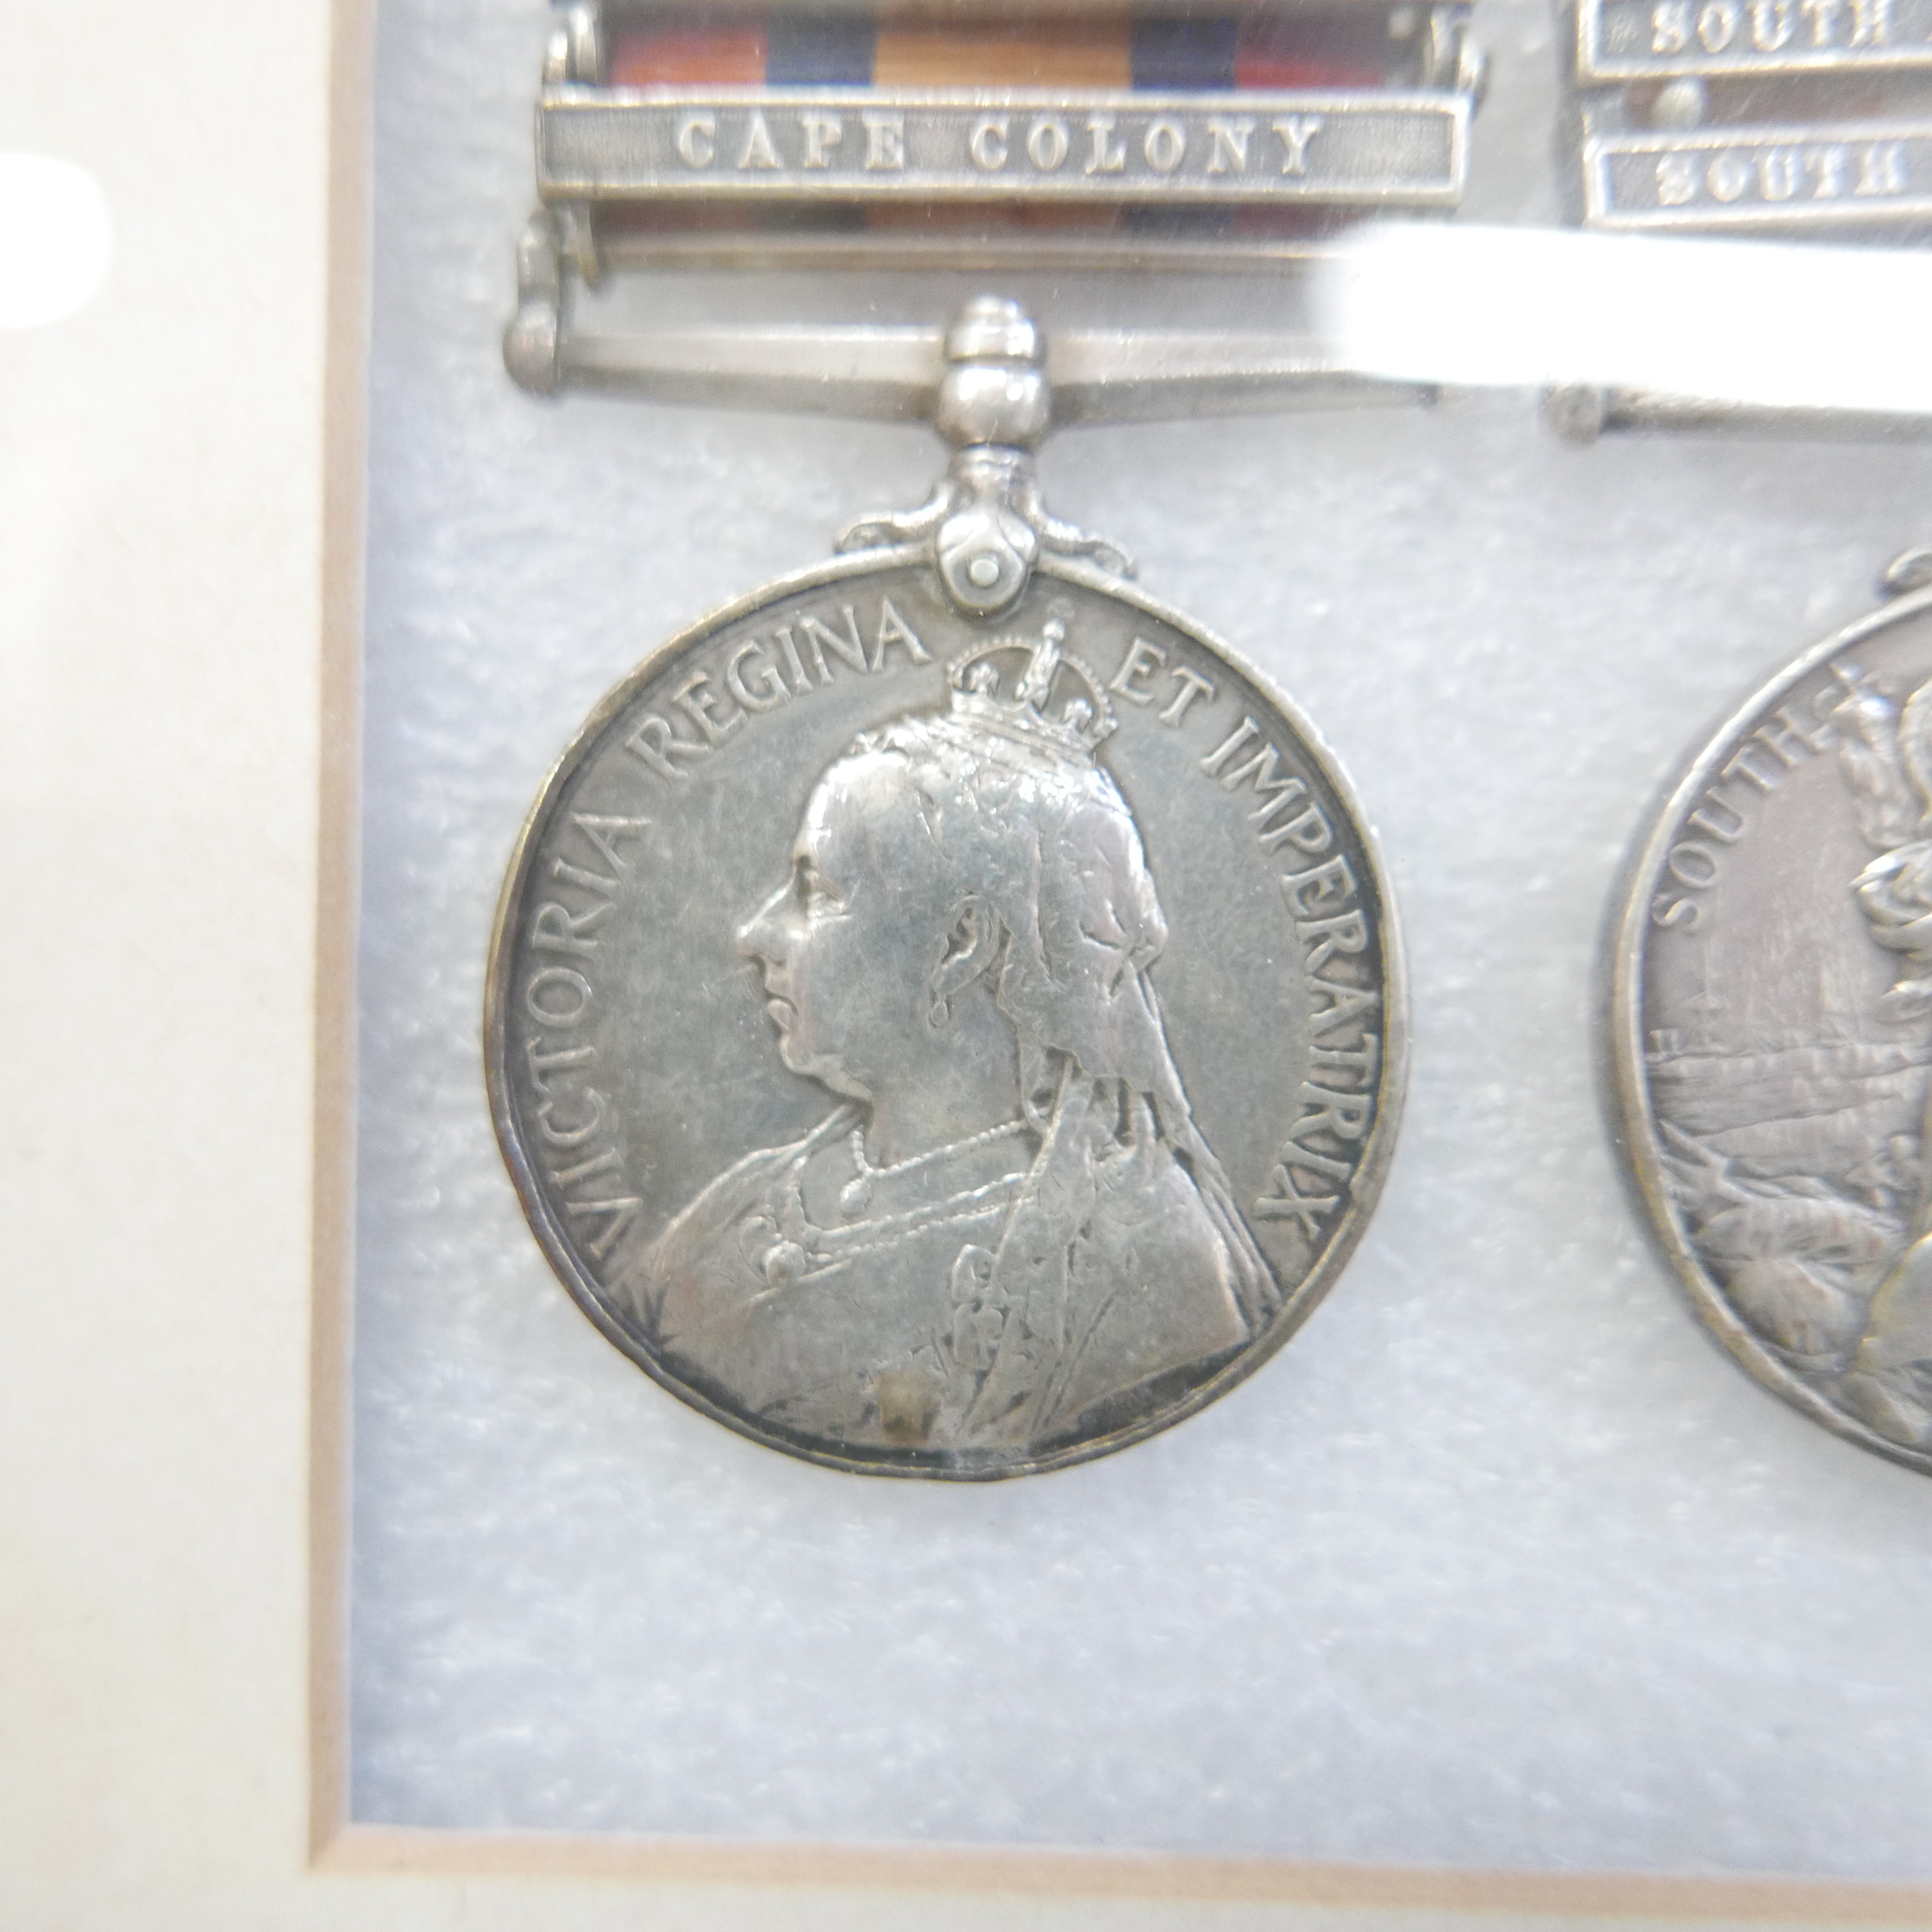 A Queen's South Africa Medal, 6 bars, and a King's South Africa Medal, 2 bars, 13211 Dvr. E. - Image 3 of 7